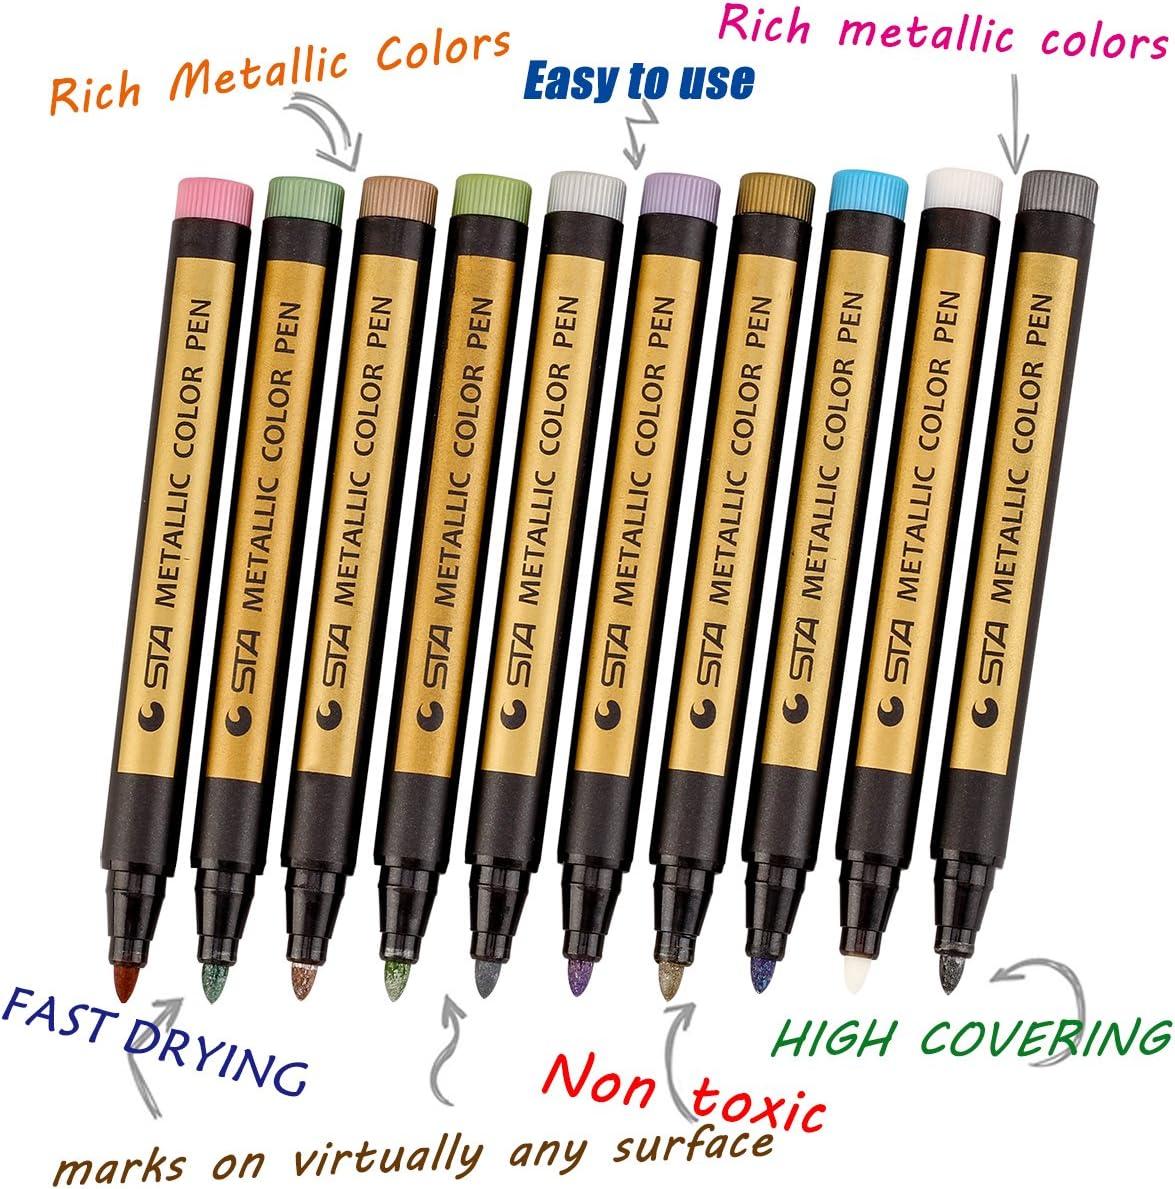 MISULOVE Metallic Marker Pens, Set of 10 Colors Paint Markers for